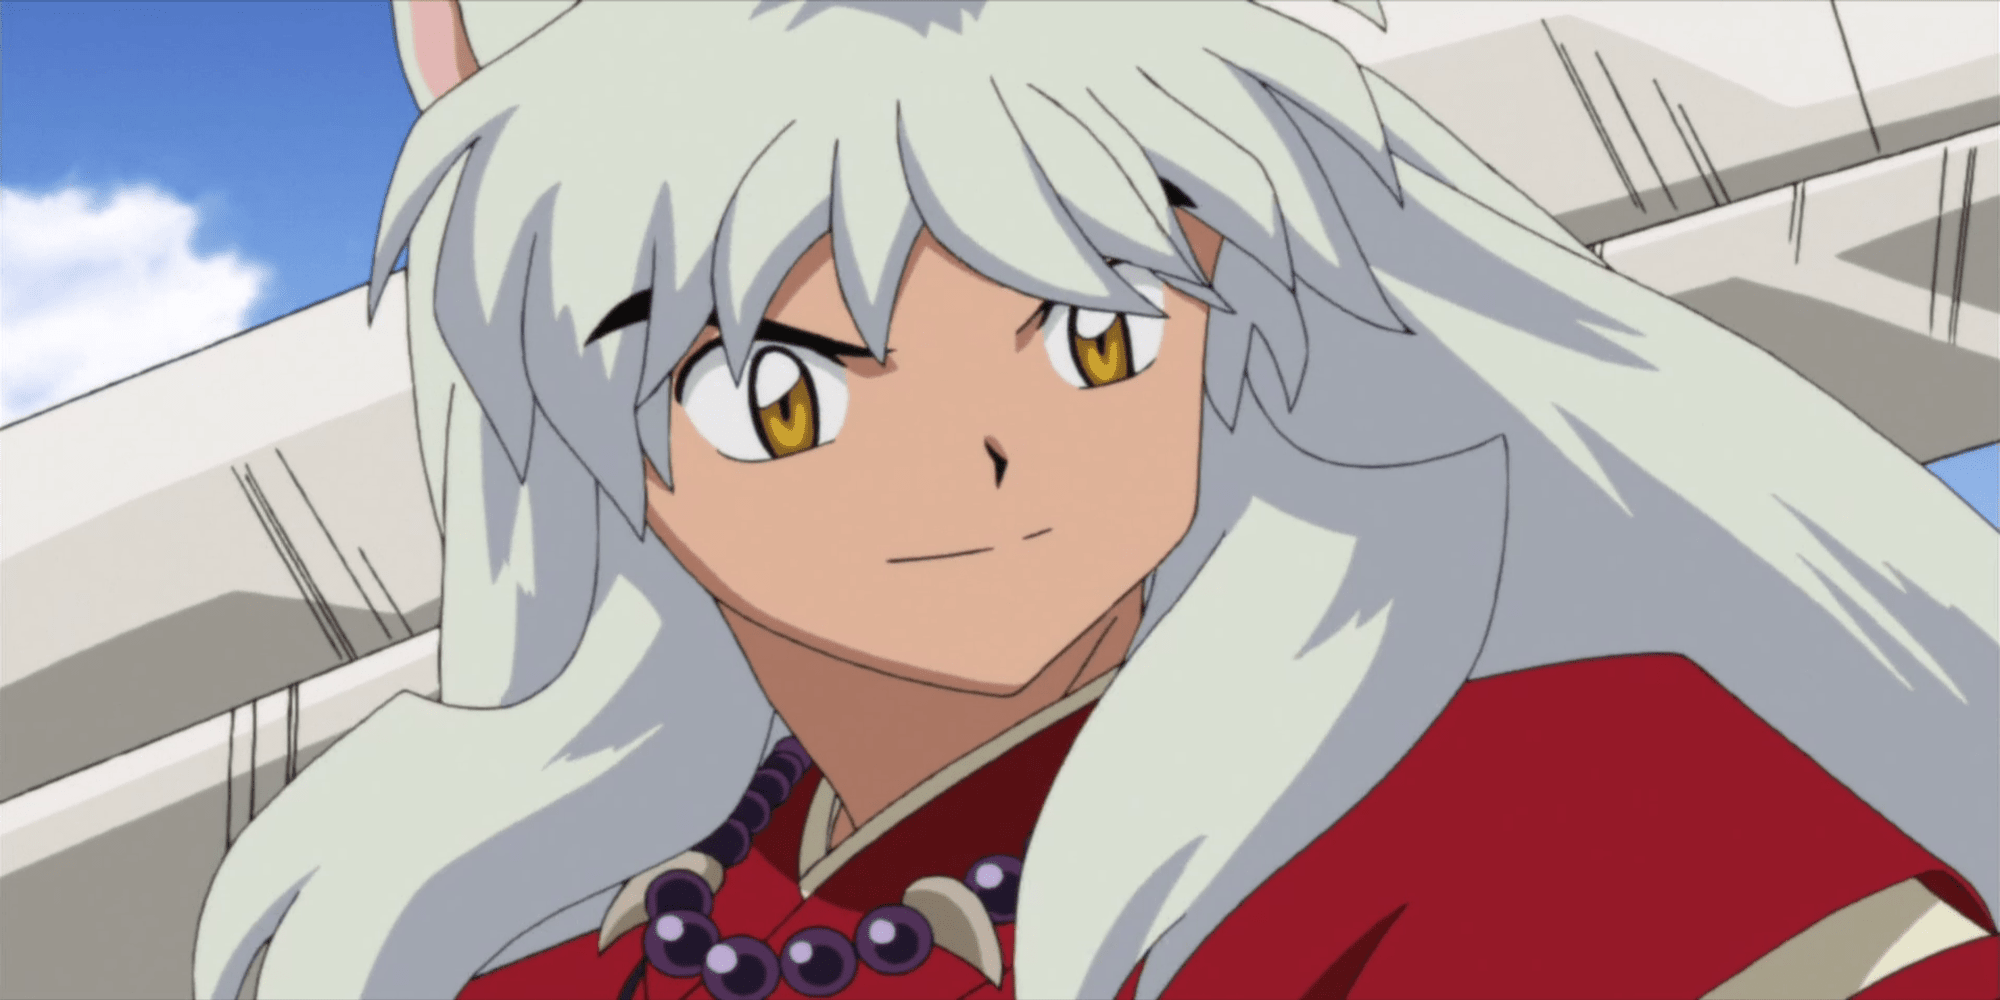 Inuyasha smiling while holding his sword behind his head